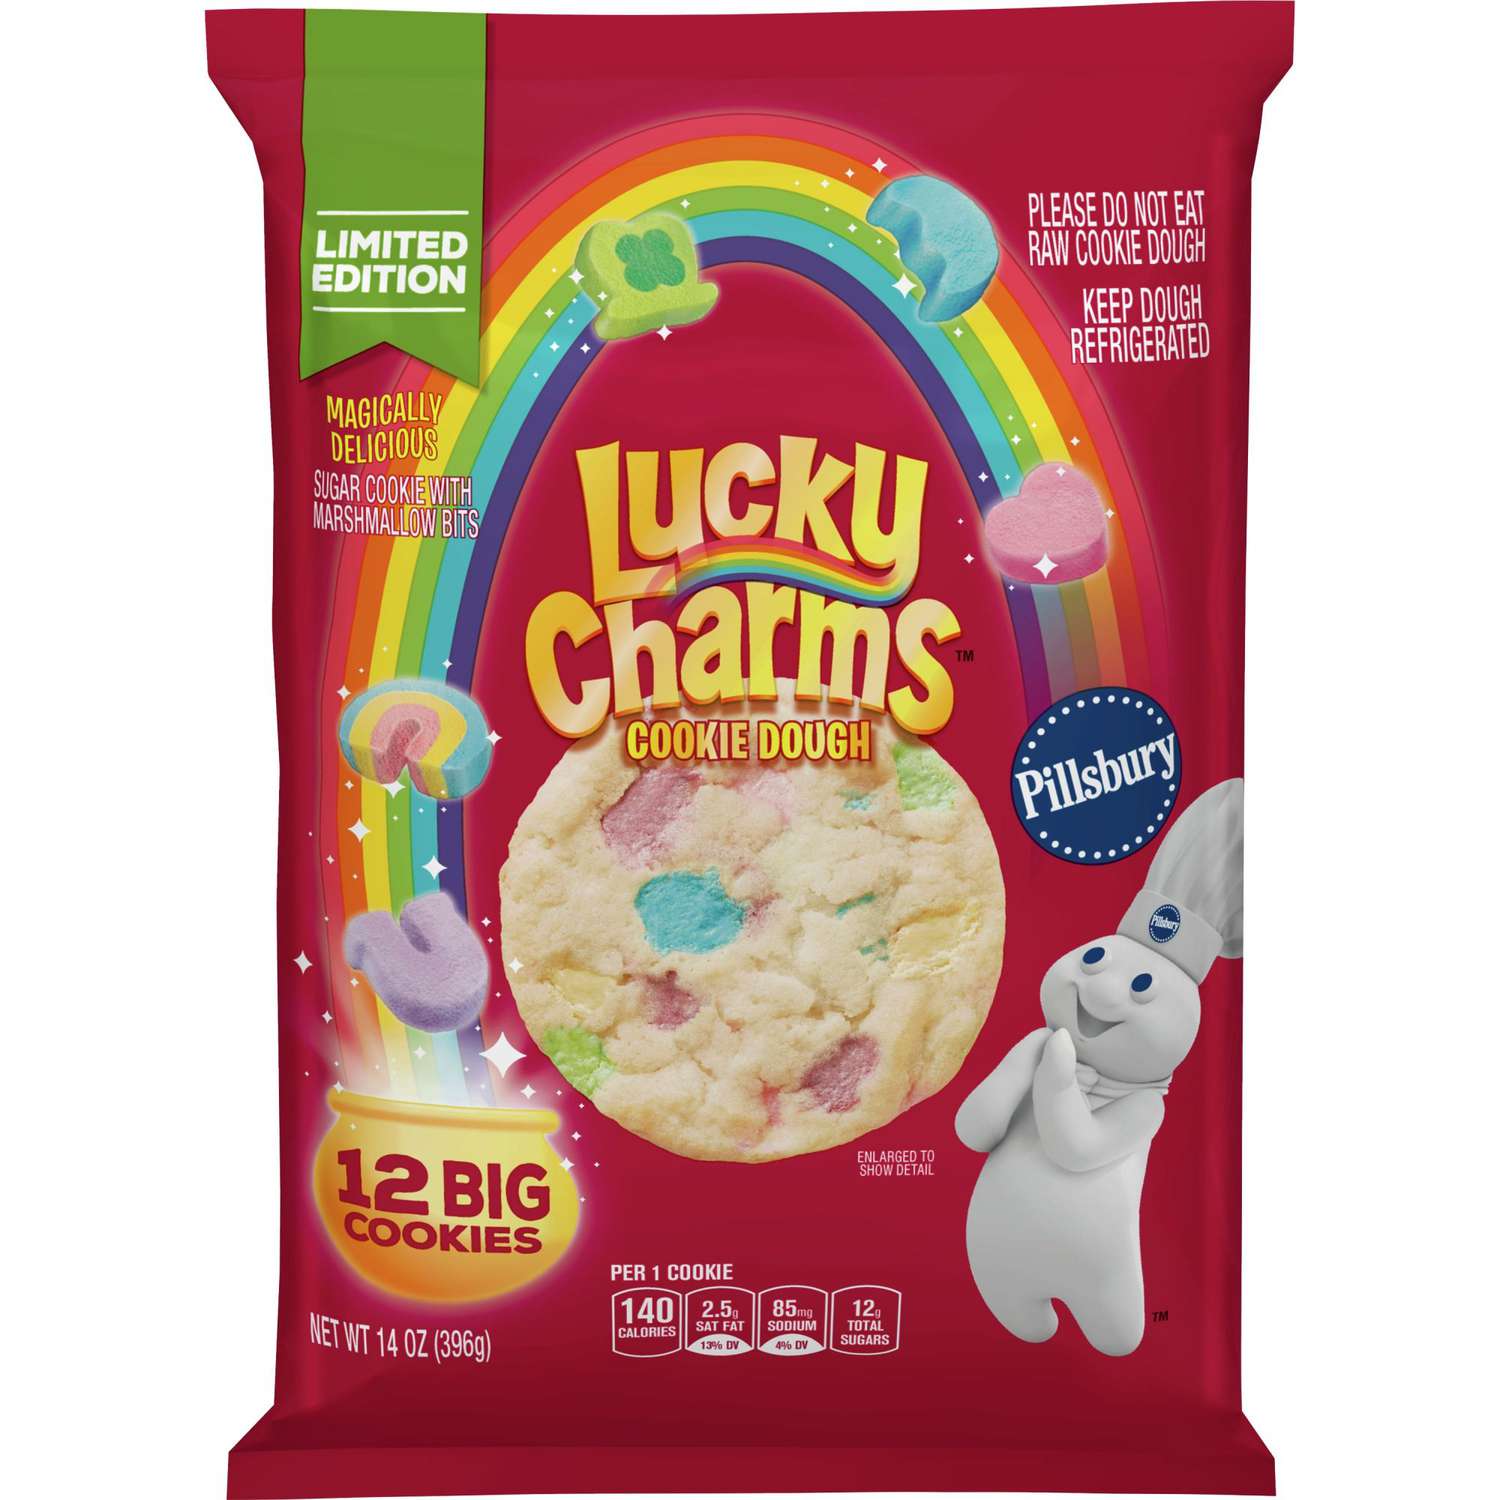 Pillsbury S New Limited Edition Sugar Cookies Are Filled With Lucky Charms Marshmallows Allrecipes